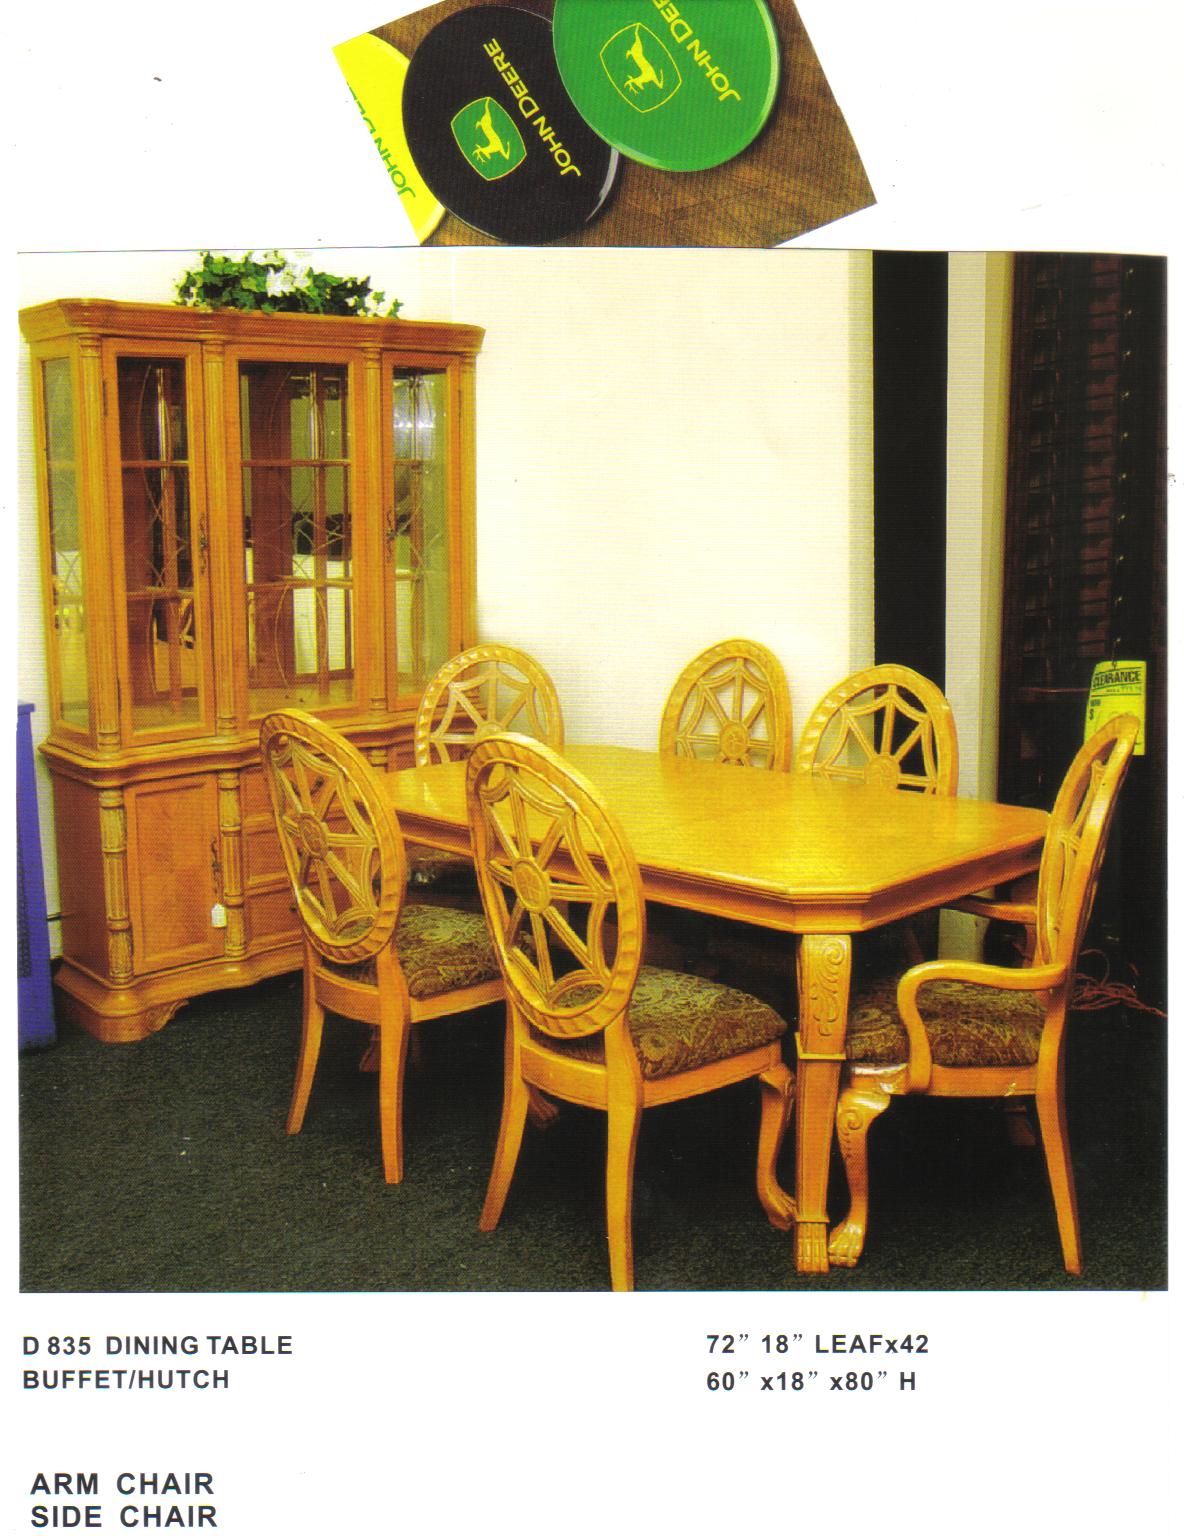 a catalog for a dining table and chairs